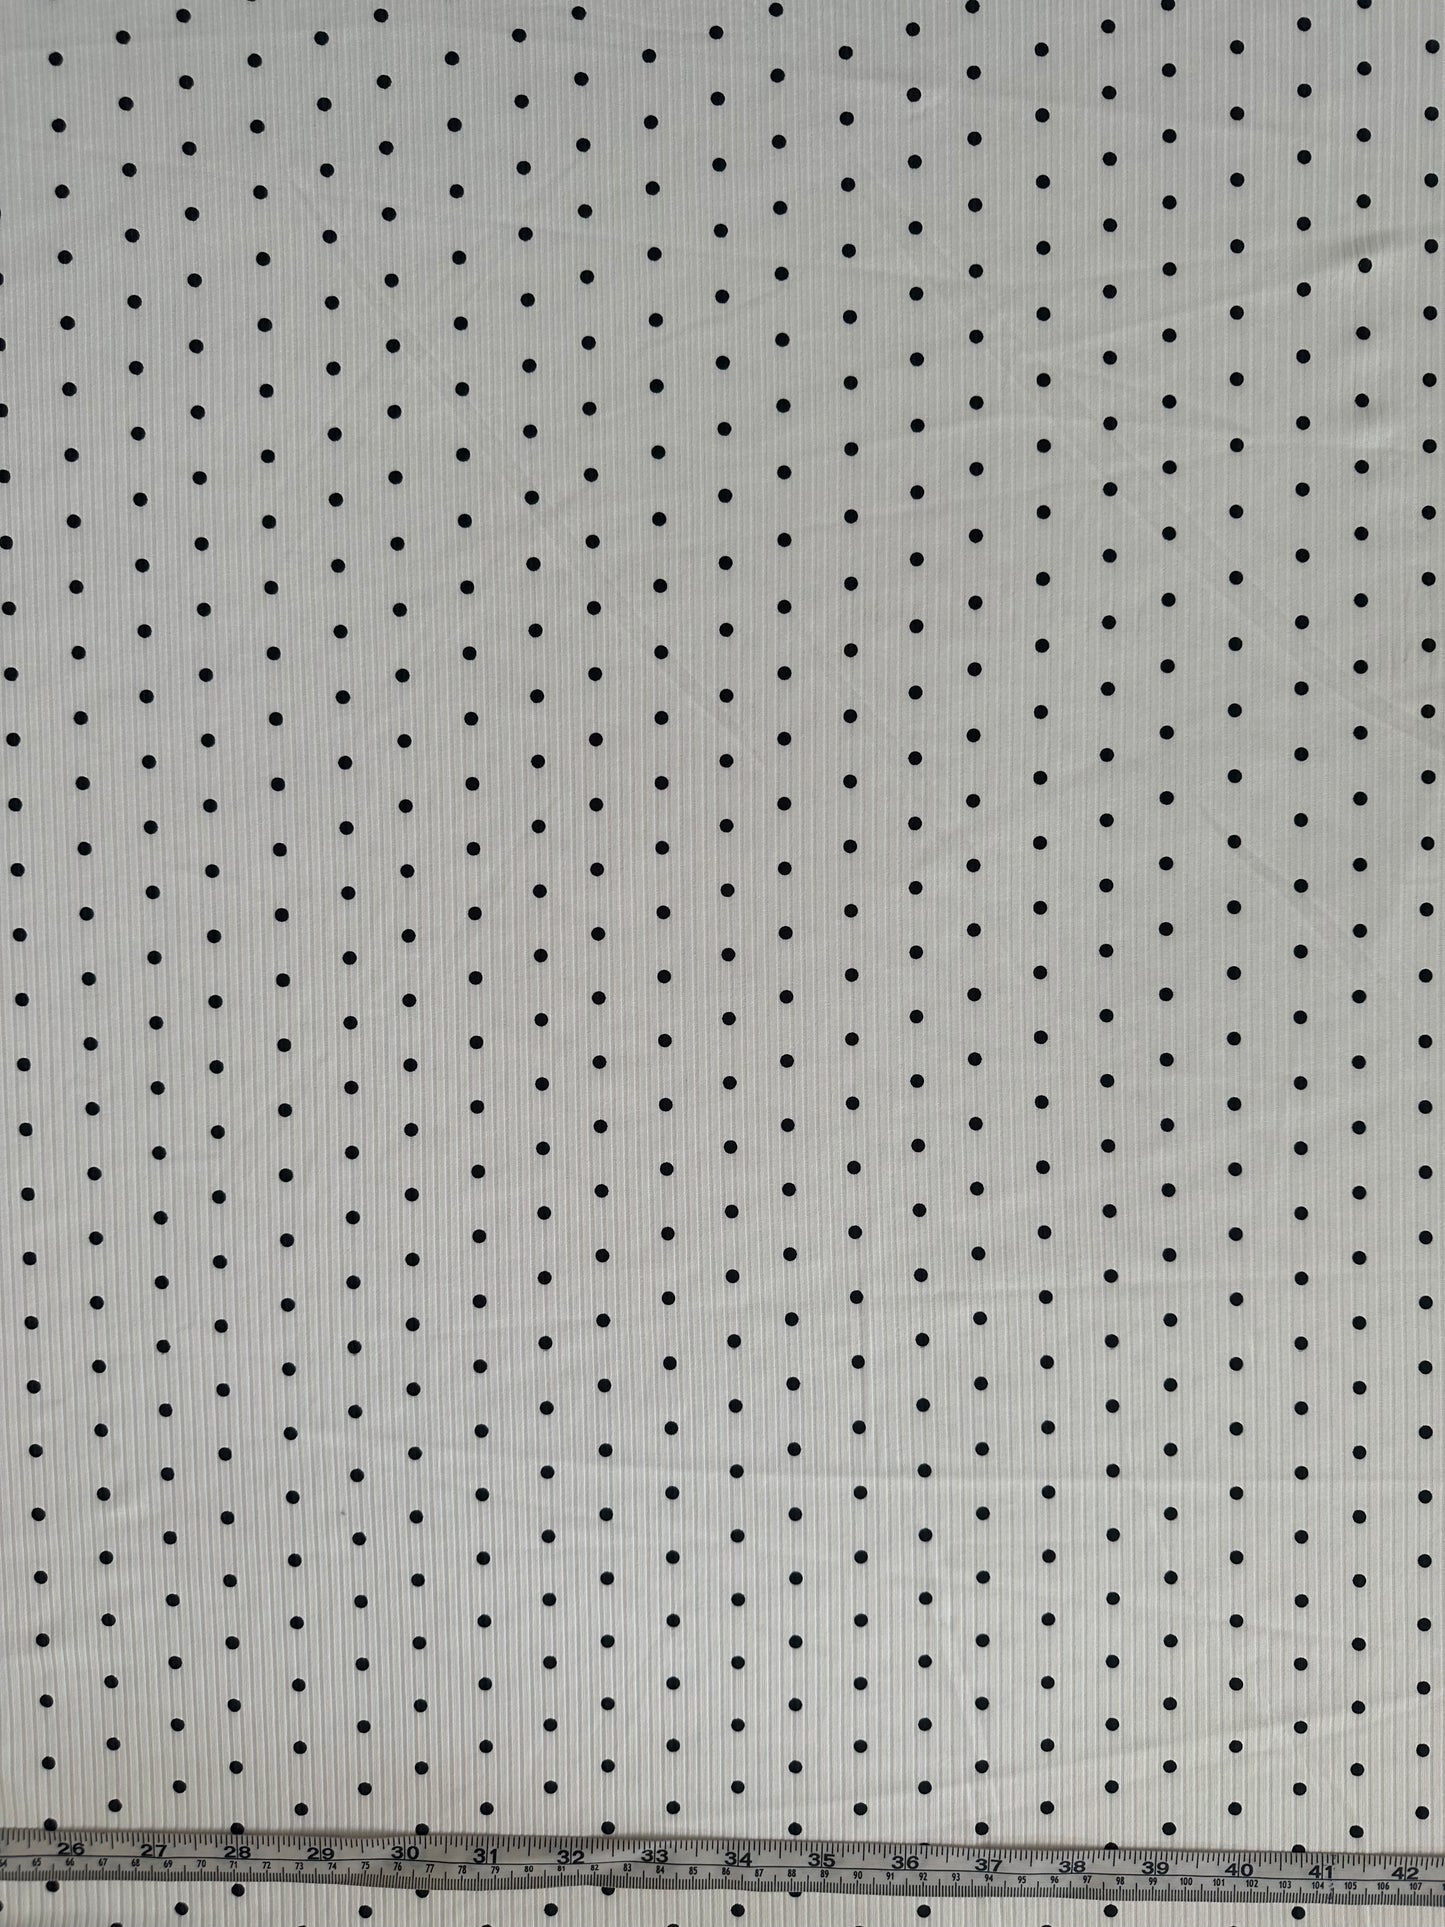 Black Dots on Off White on Unbrushed Rib Knit Fabric Sold by the 1/4 yard